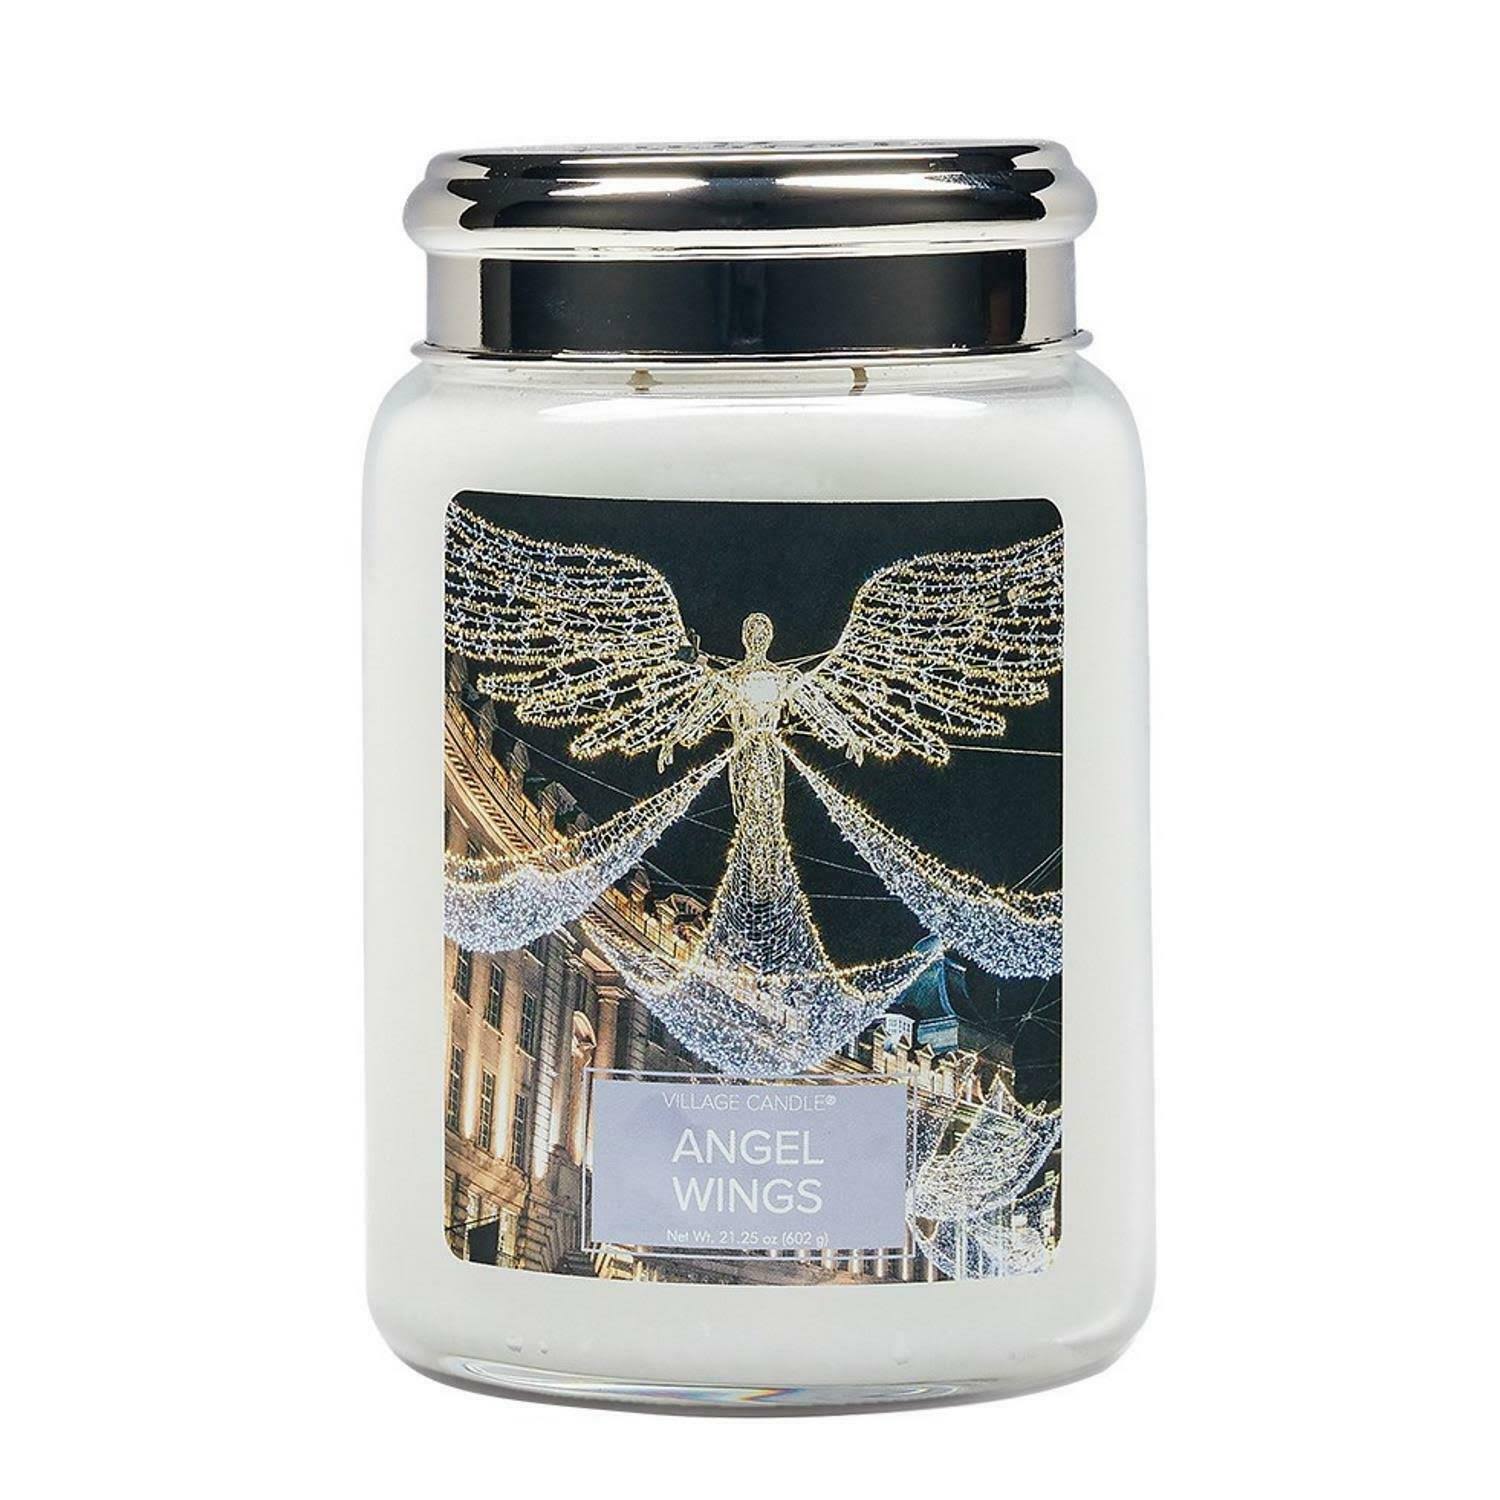 Village Candle Angel Wings Large Jar Candle